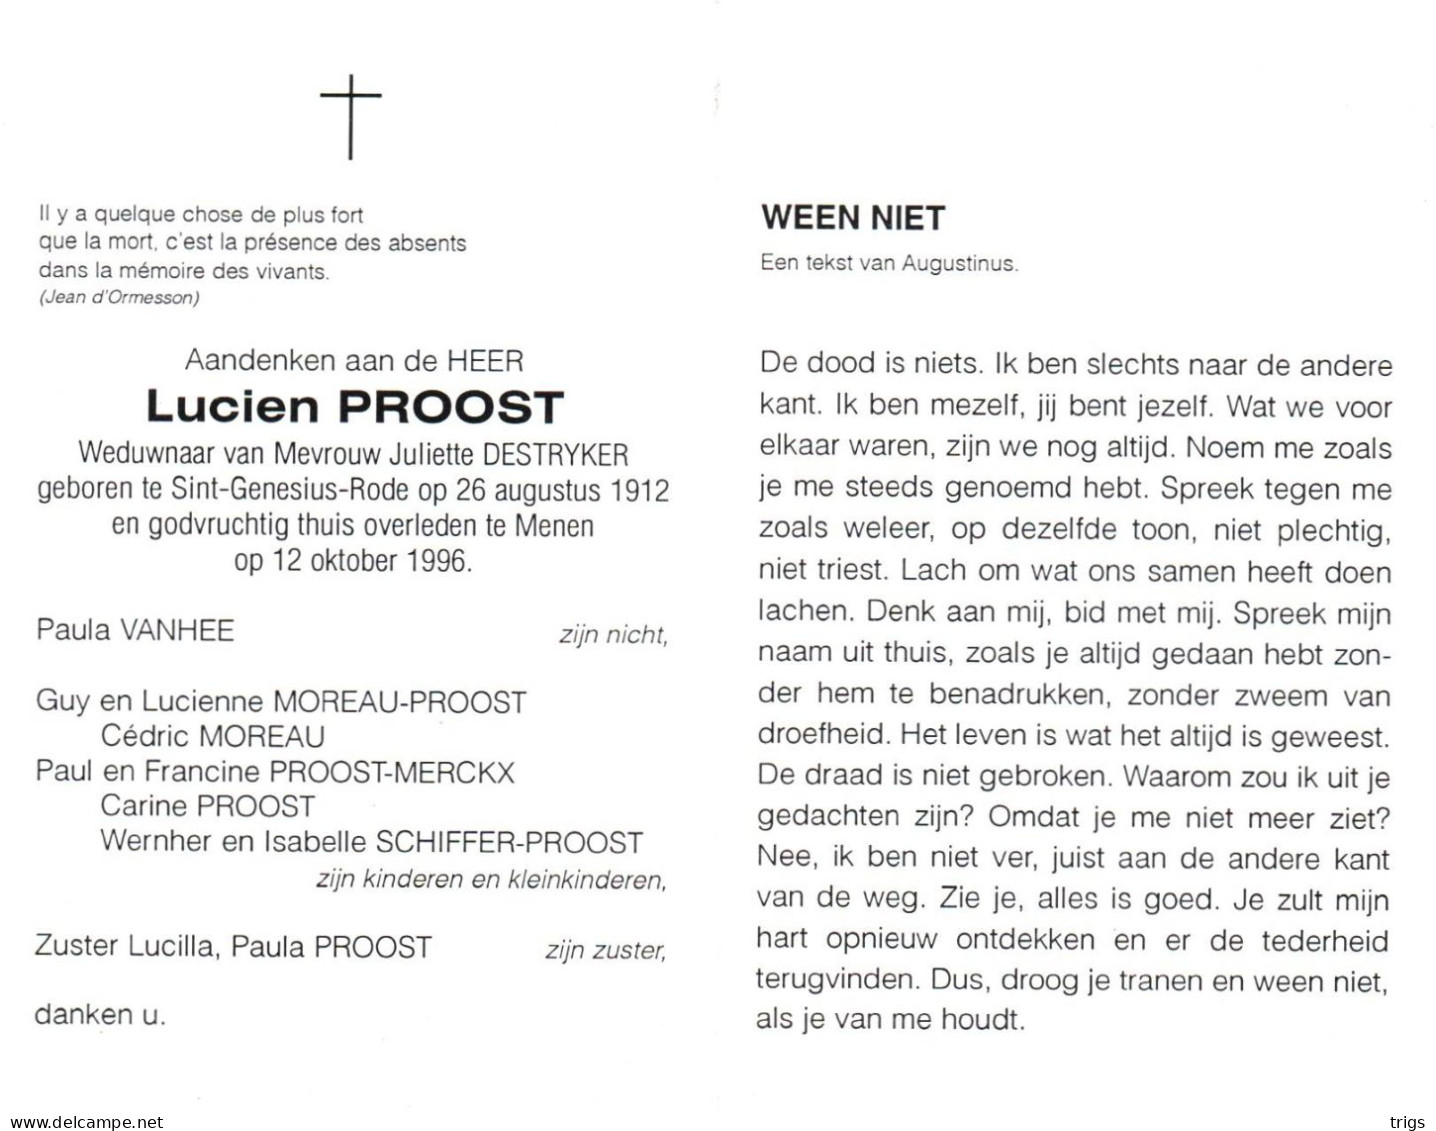 Lucien Proost (1912-1996) - Andachtsbilder